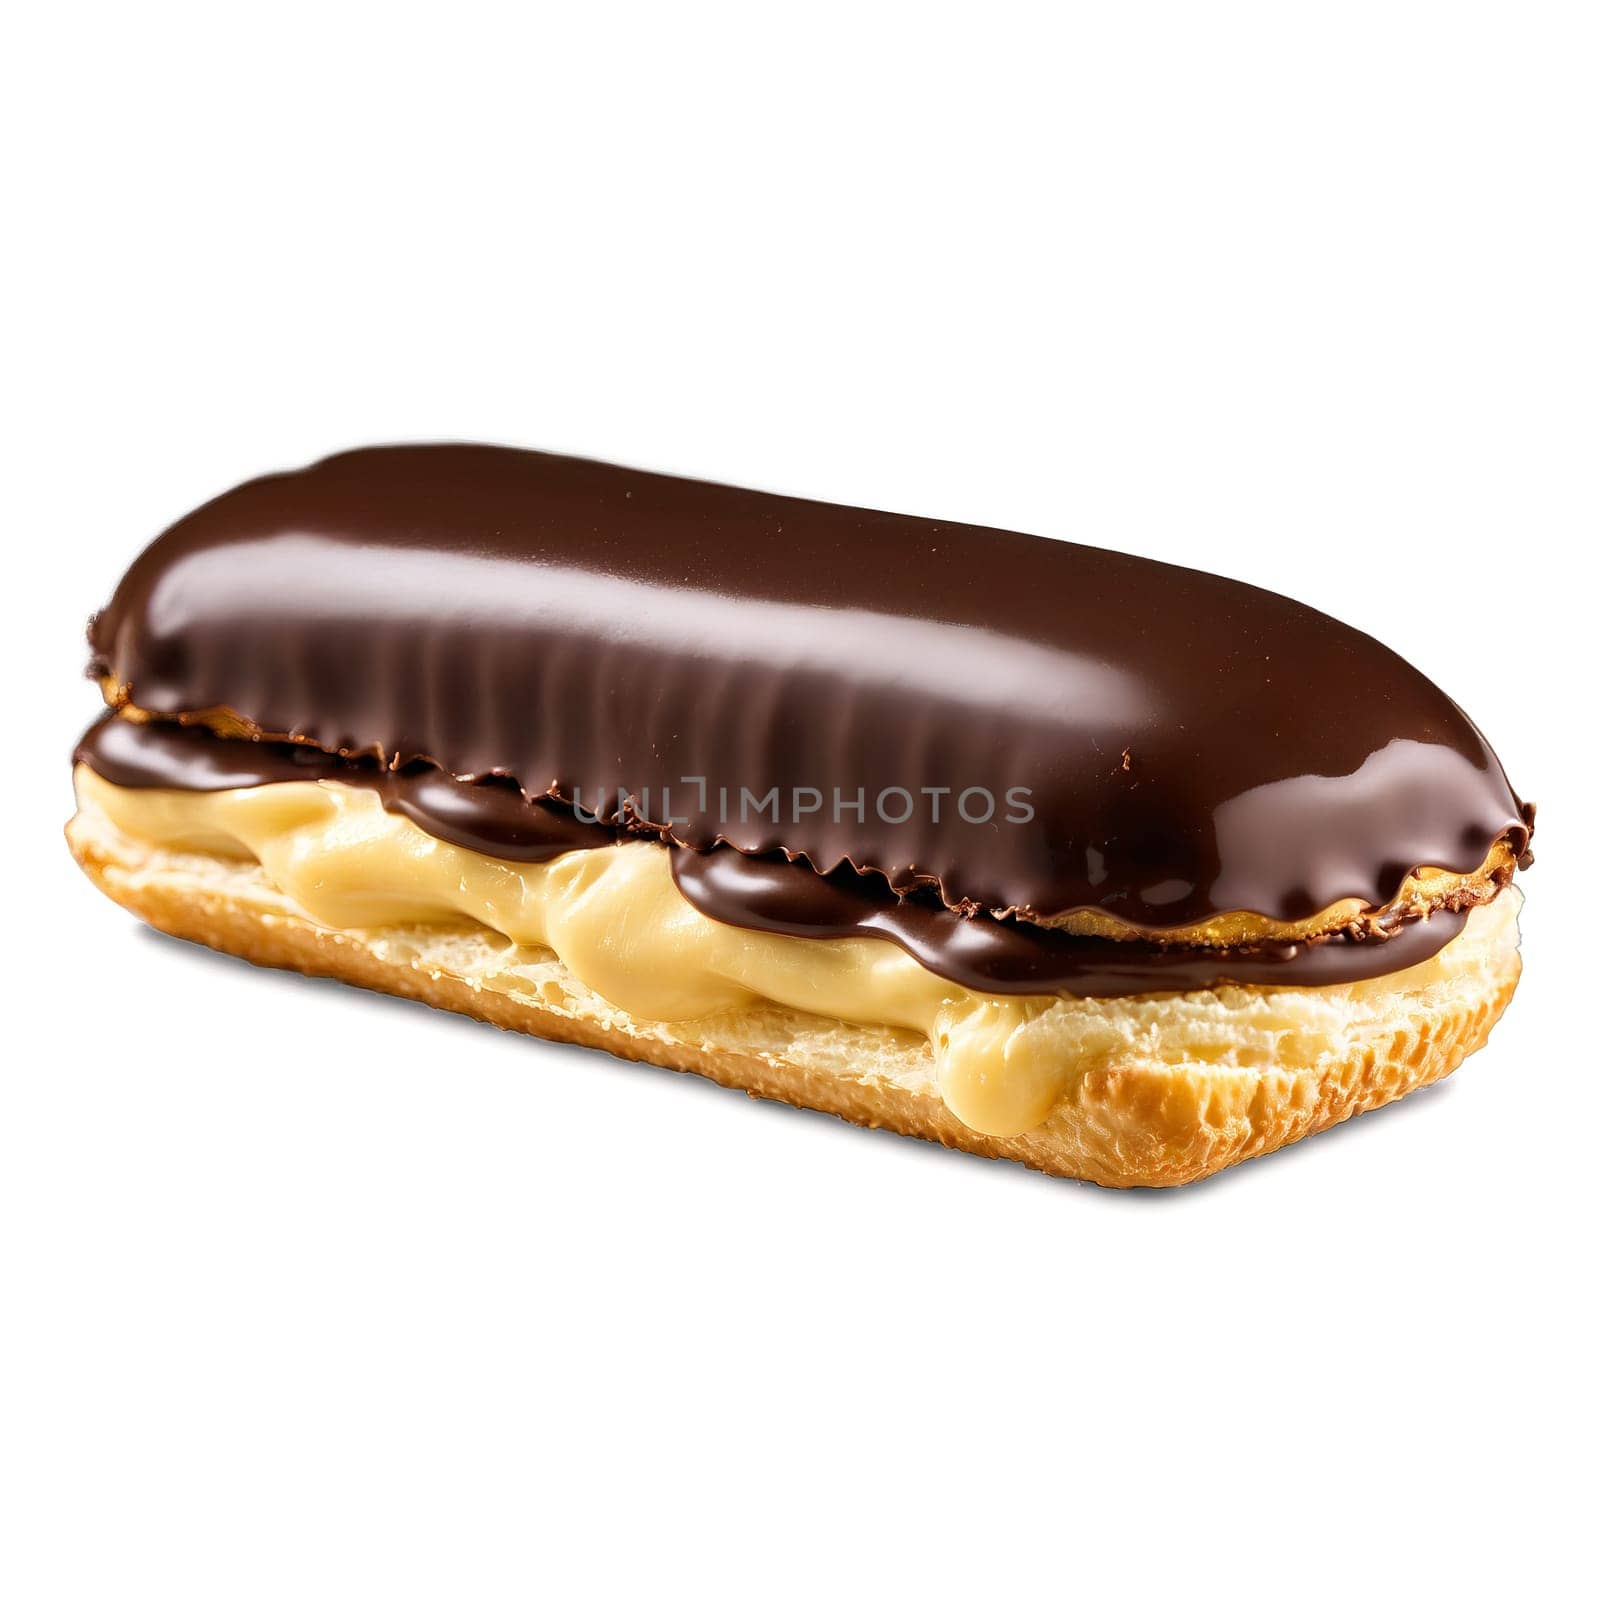 Chocolate eclair with rich ganache coating elongated shape delicate pastry creamy filling Culinary and Food. close-up cake, isolated on transparent background